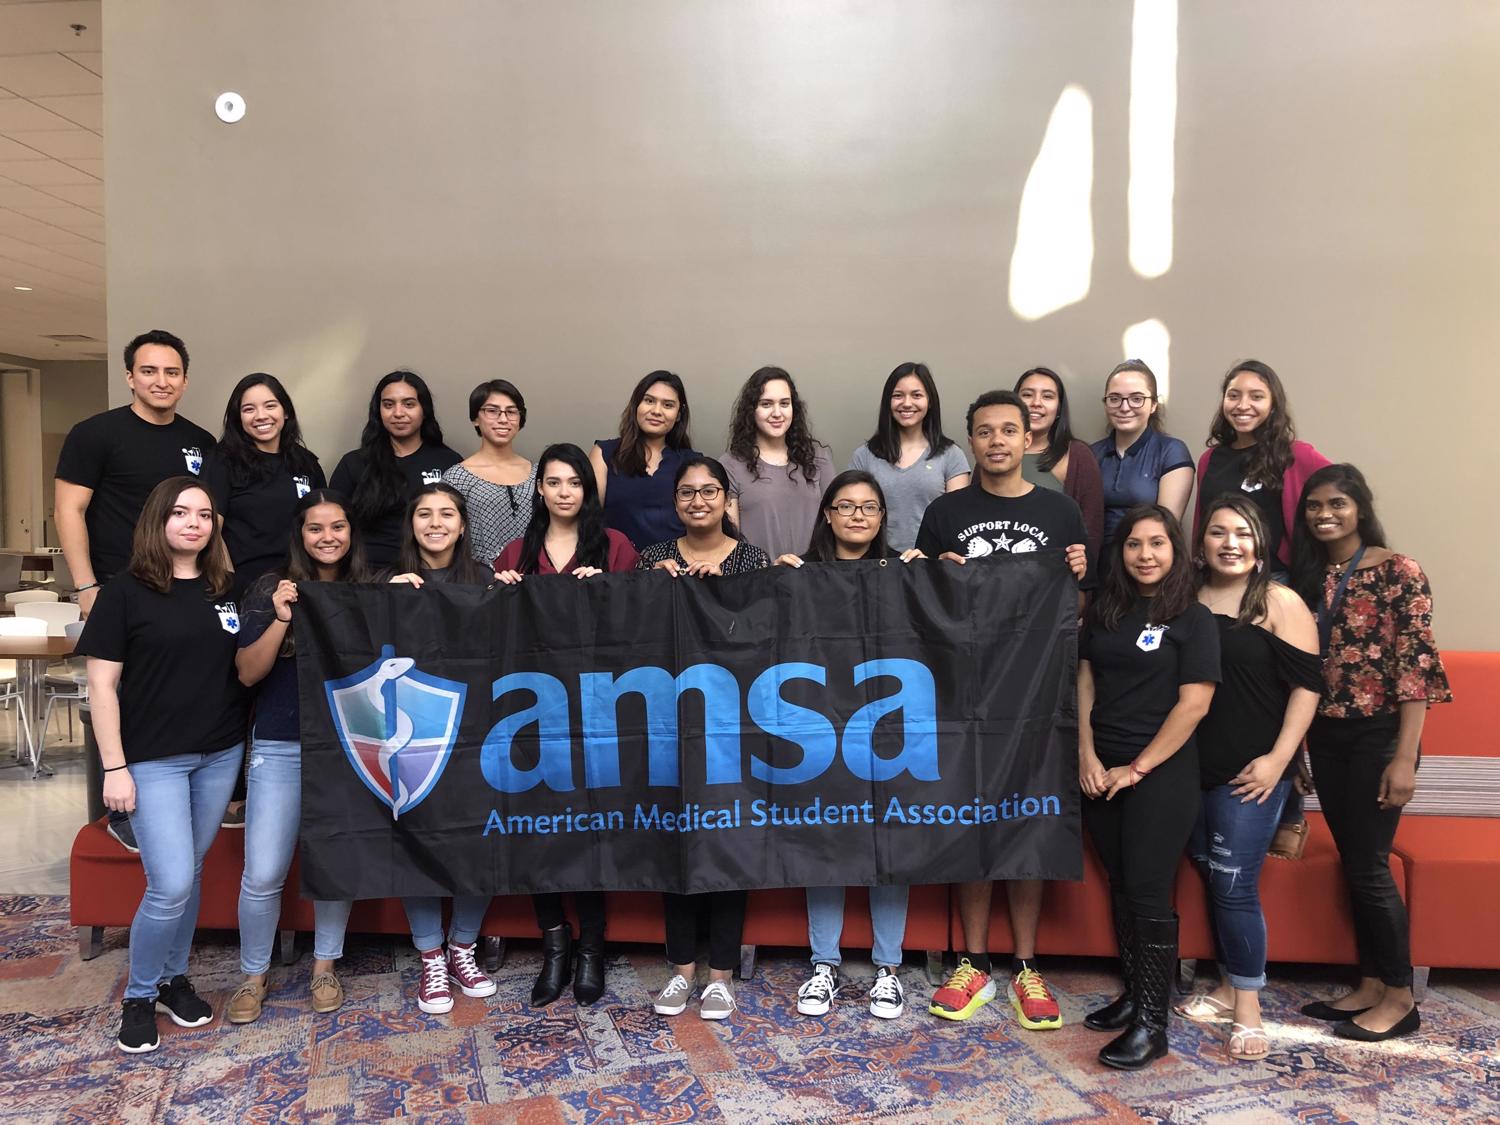 american medical association group picture holding up amsa banner